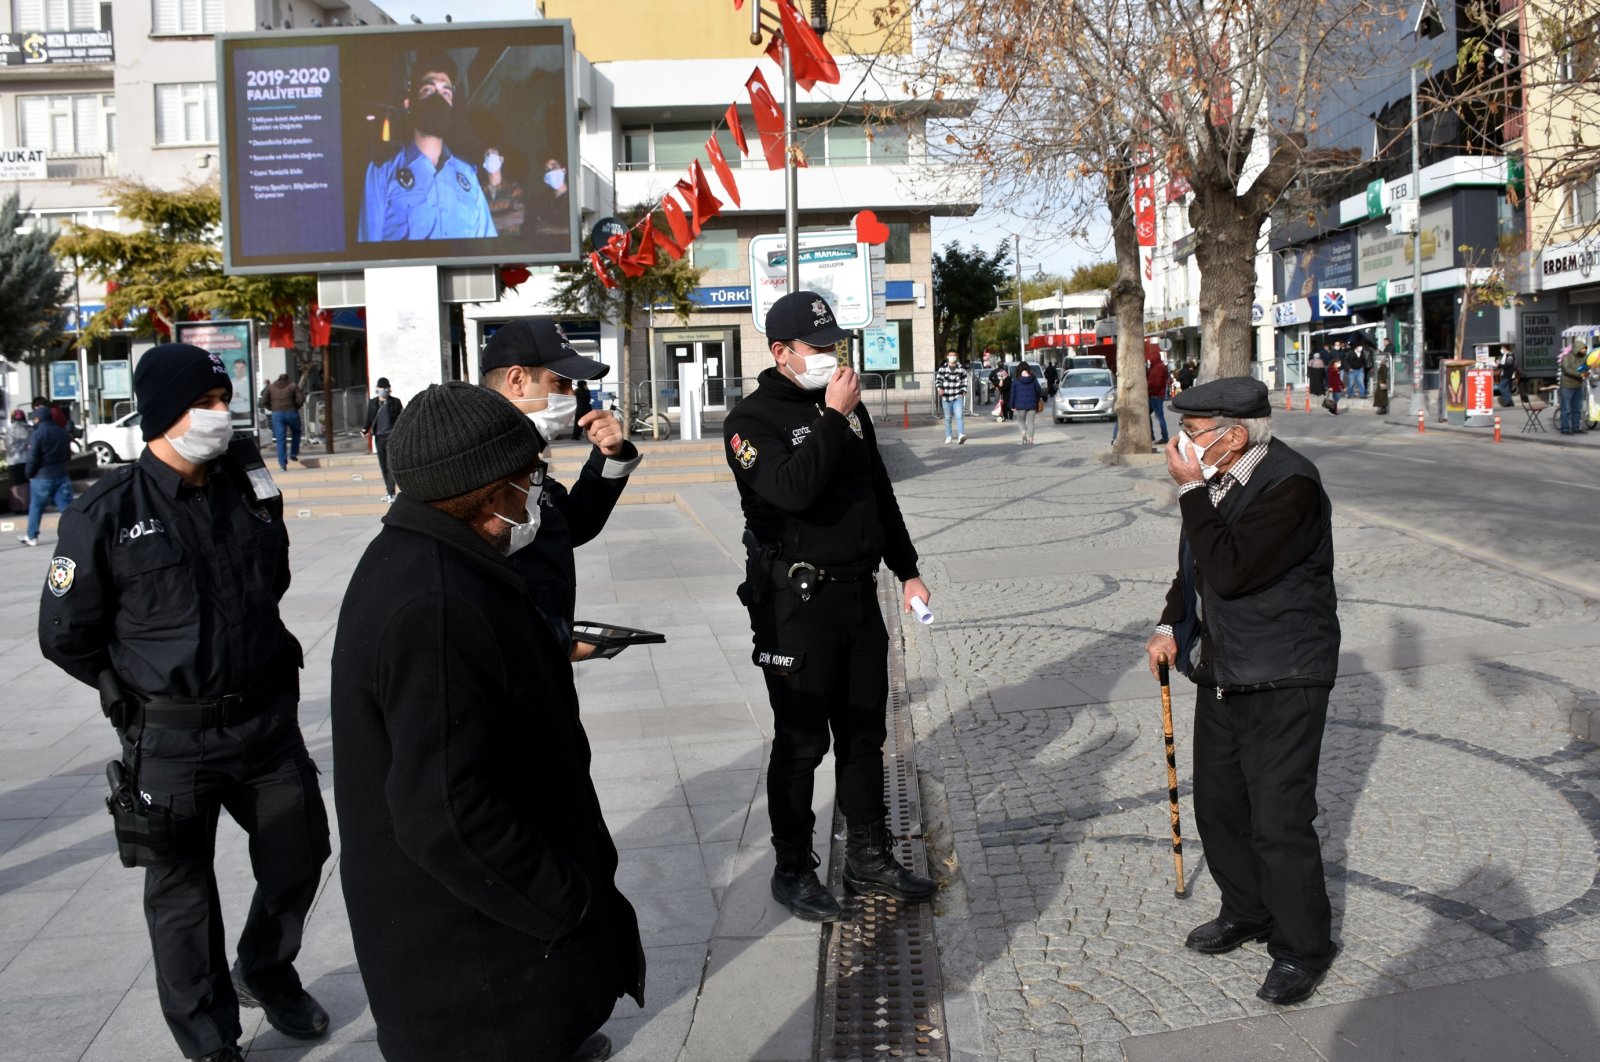 Police speak with a senior citizen during awareness efforts against the coronavirus in the central province of Aksaray on Nov. 26, 2020. (AA Photo)